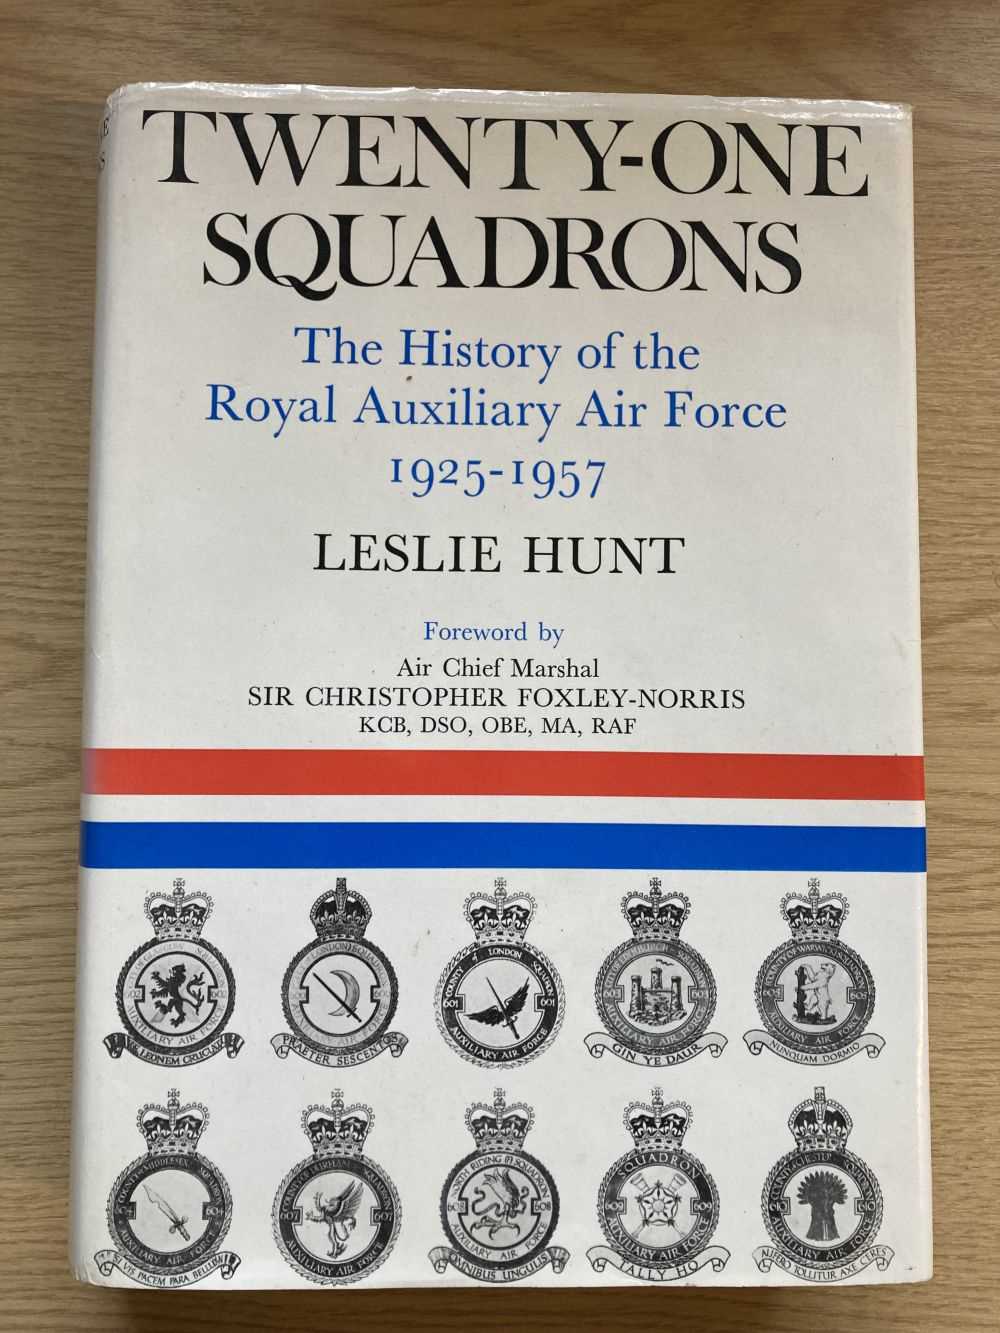 Lot 251 - Hunt (Leslie). Twenty-One Squadrons, The History of the Royal Auxiliary Air Force 1925-1957, multi-signed publication